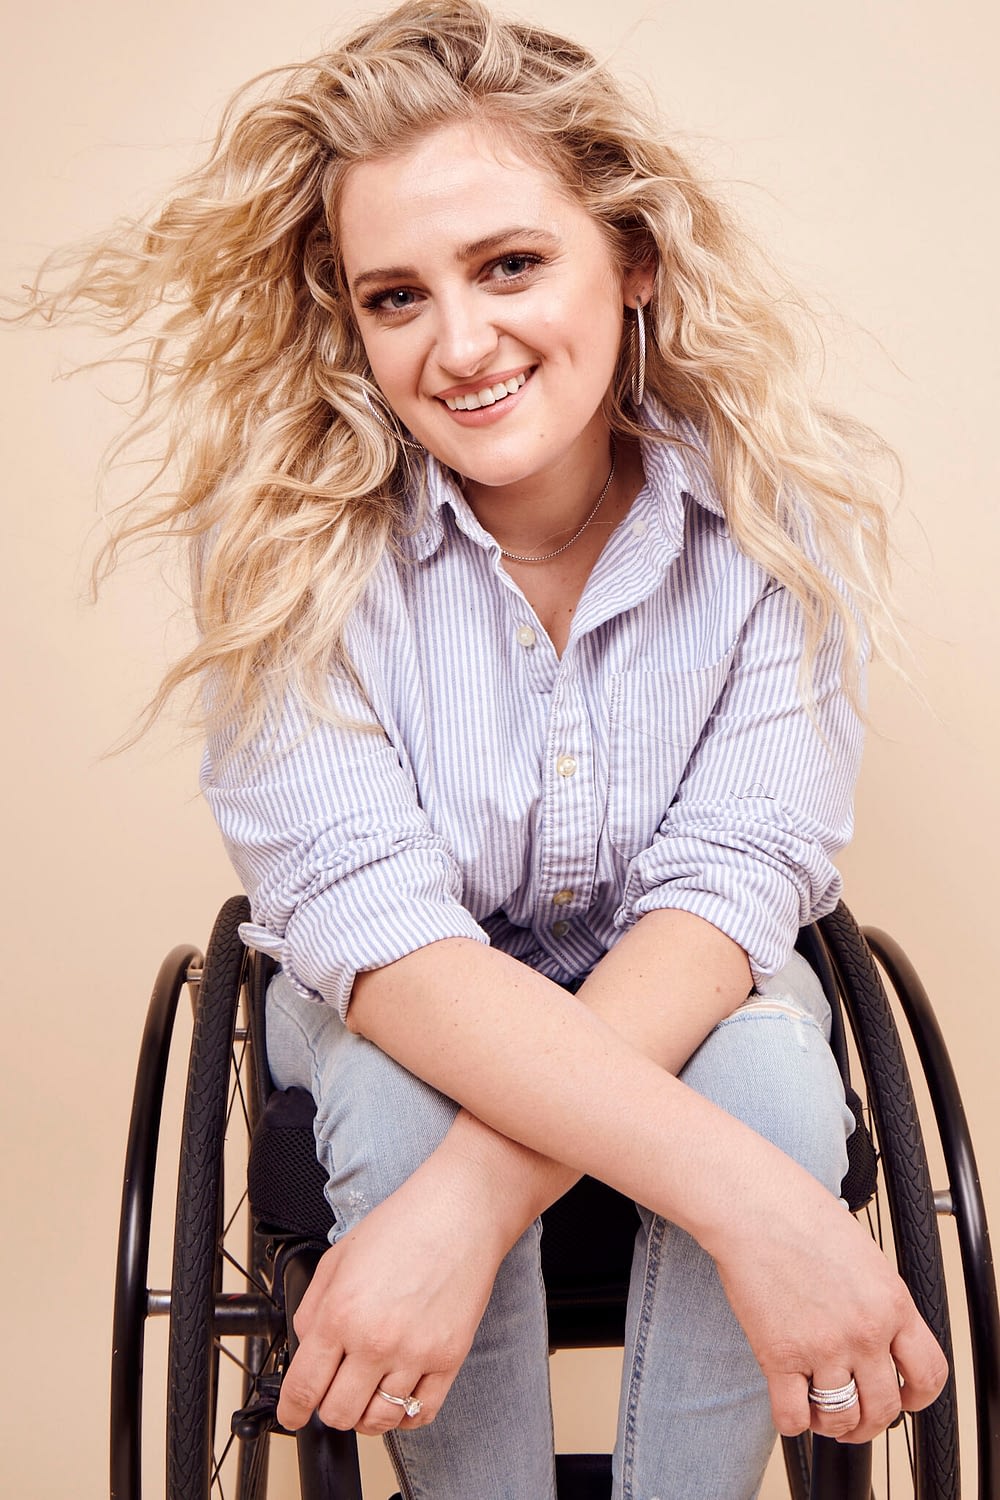 Ali smiles with her arms crossed while sitting in her wheelchair.